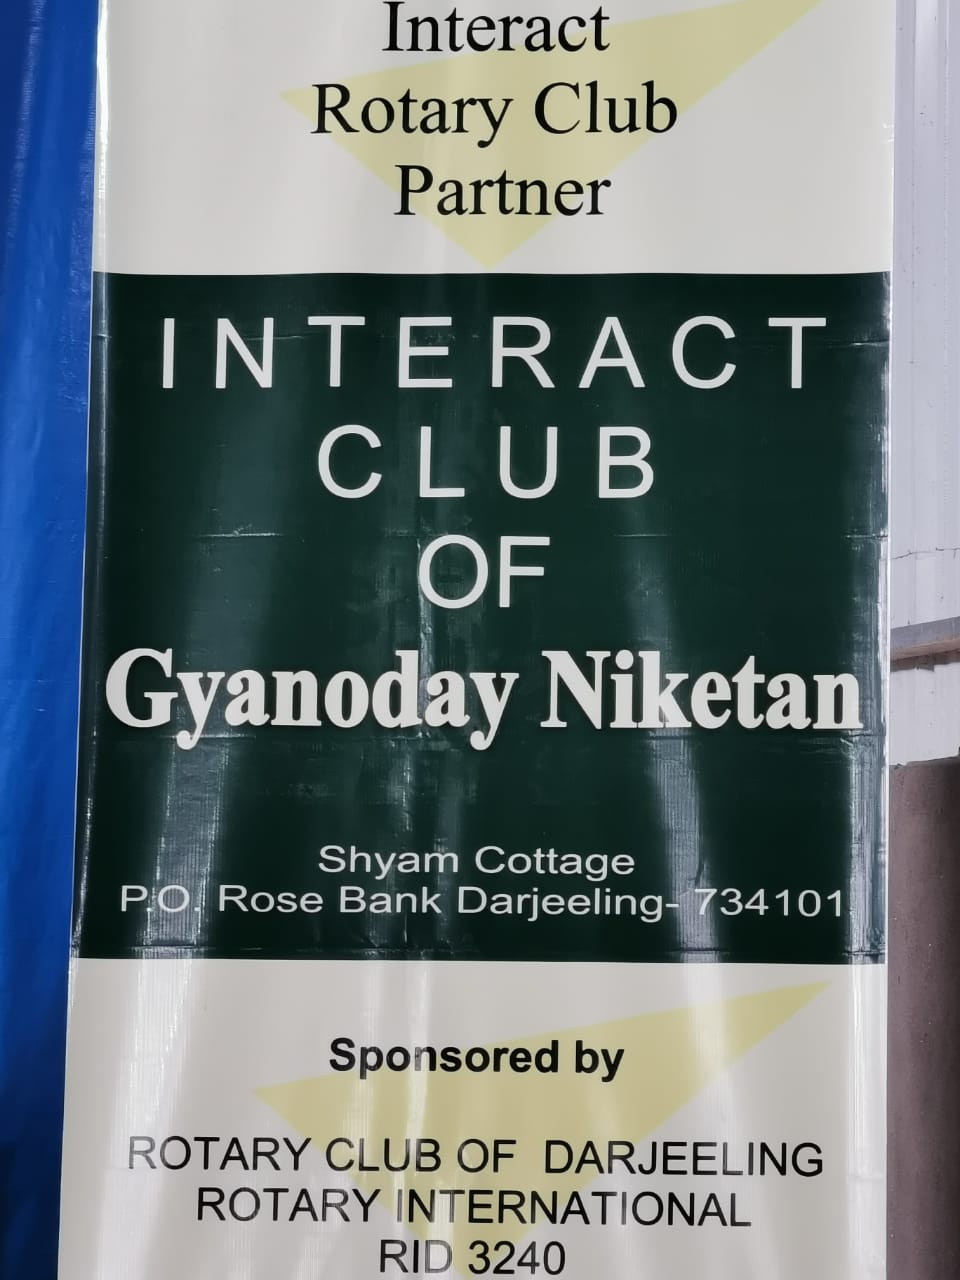 The first installation ceremony and presentation of the charter of Interact Club of Gyanoday Niketan